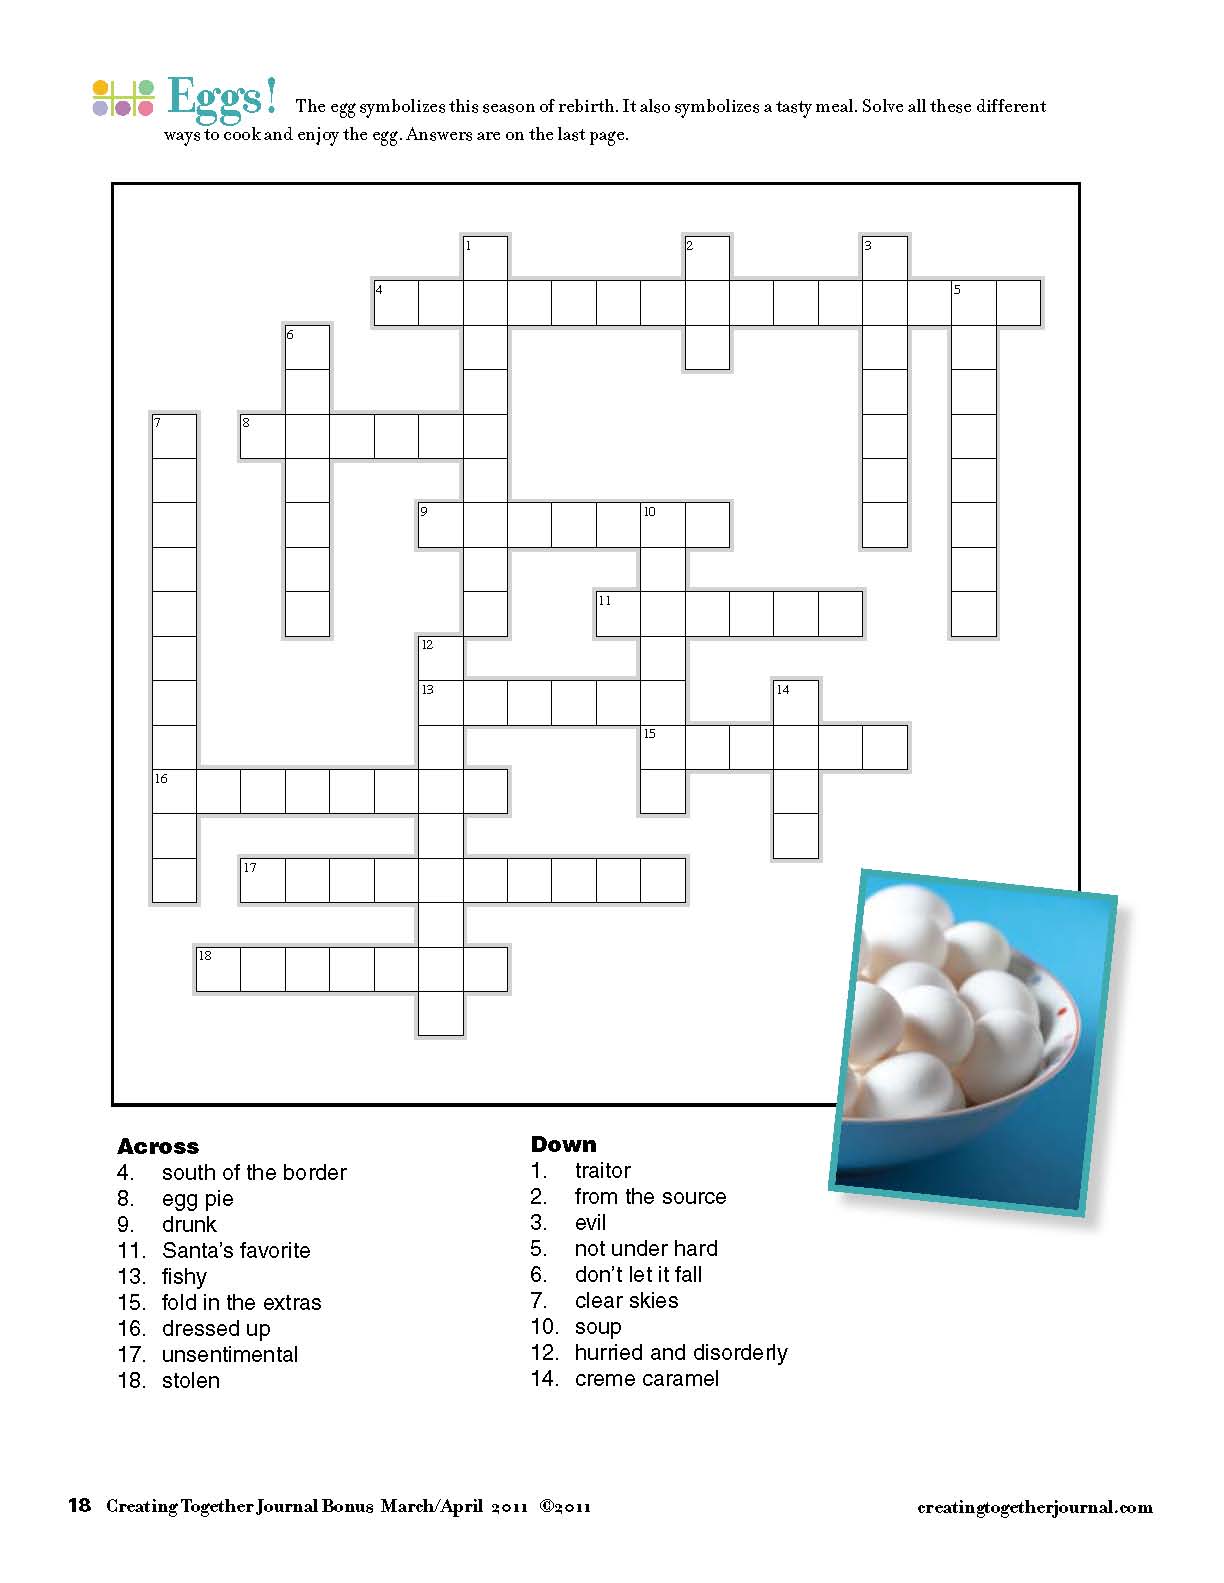 Creating Together Journal: Eggs Crossword Puzzle